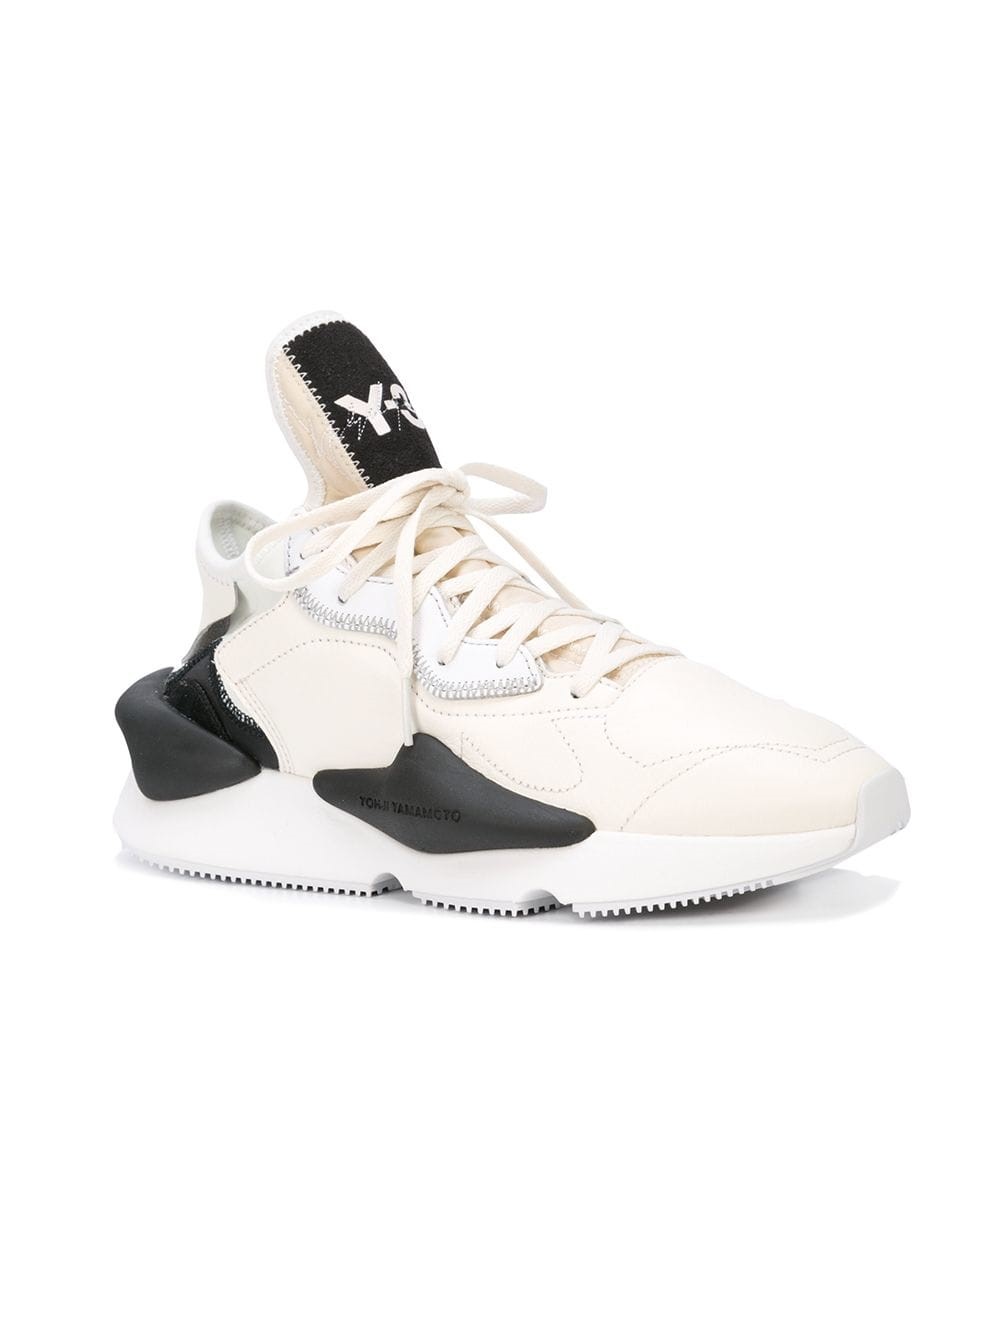 y-3 SNEAKERS available on montiboutique.com - 25182